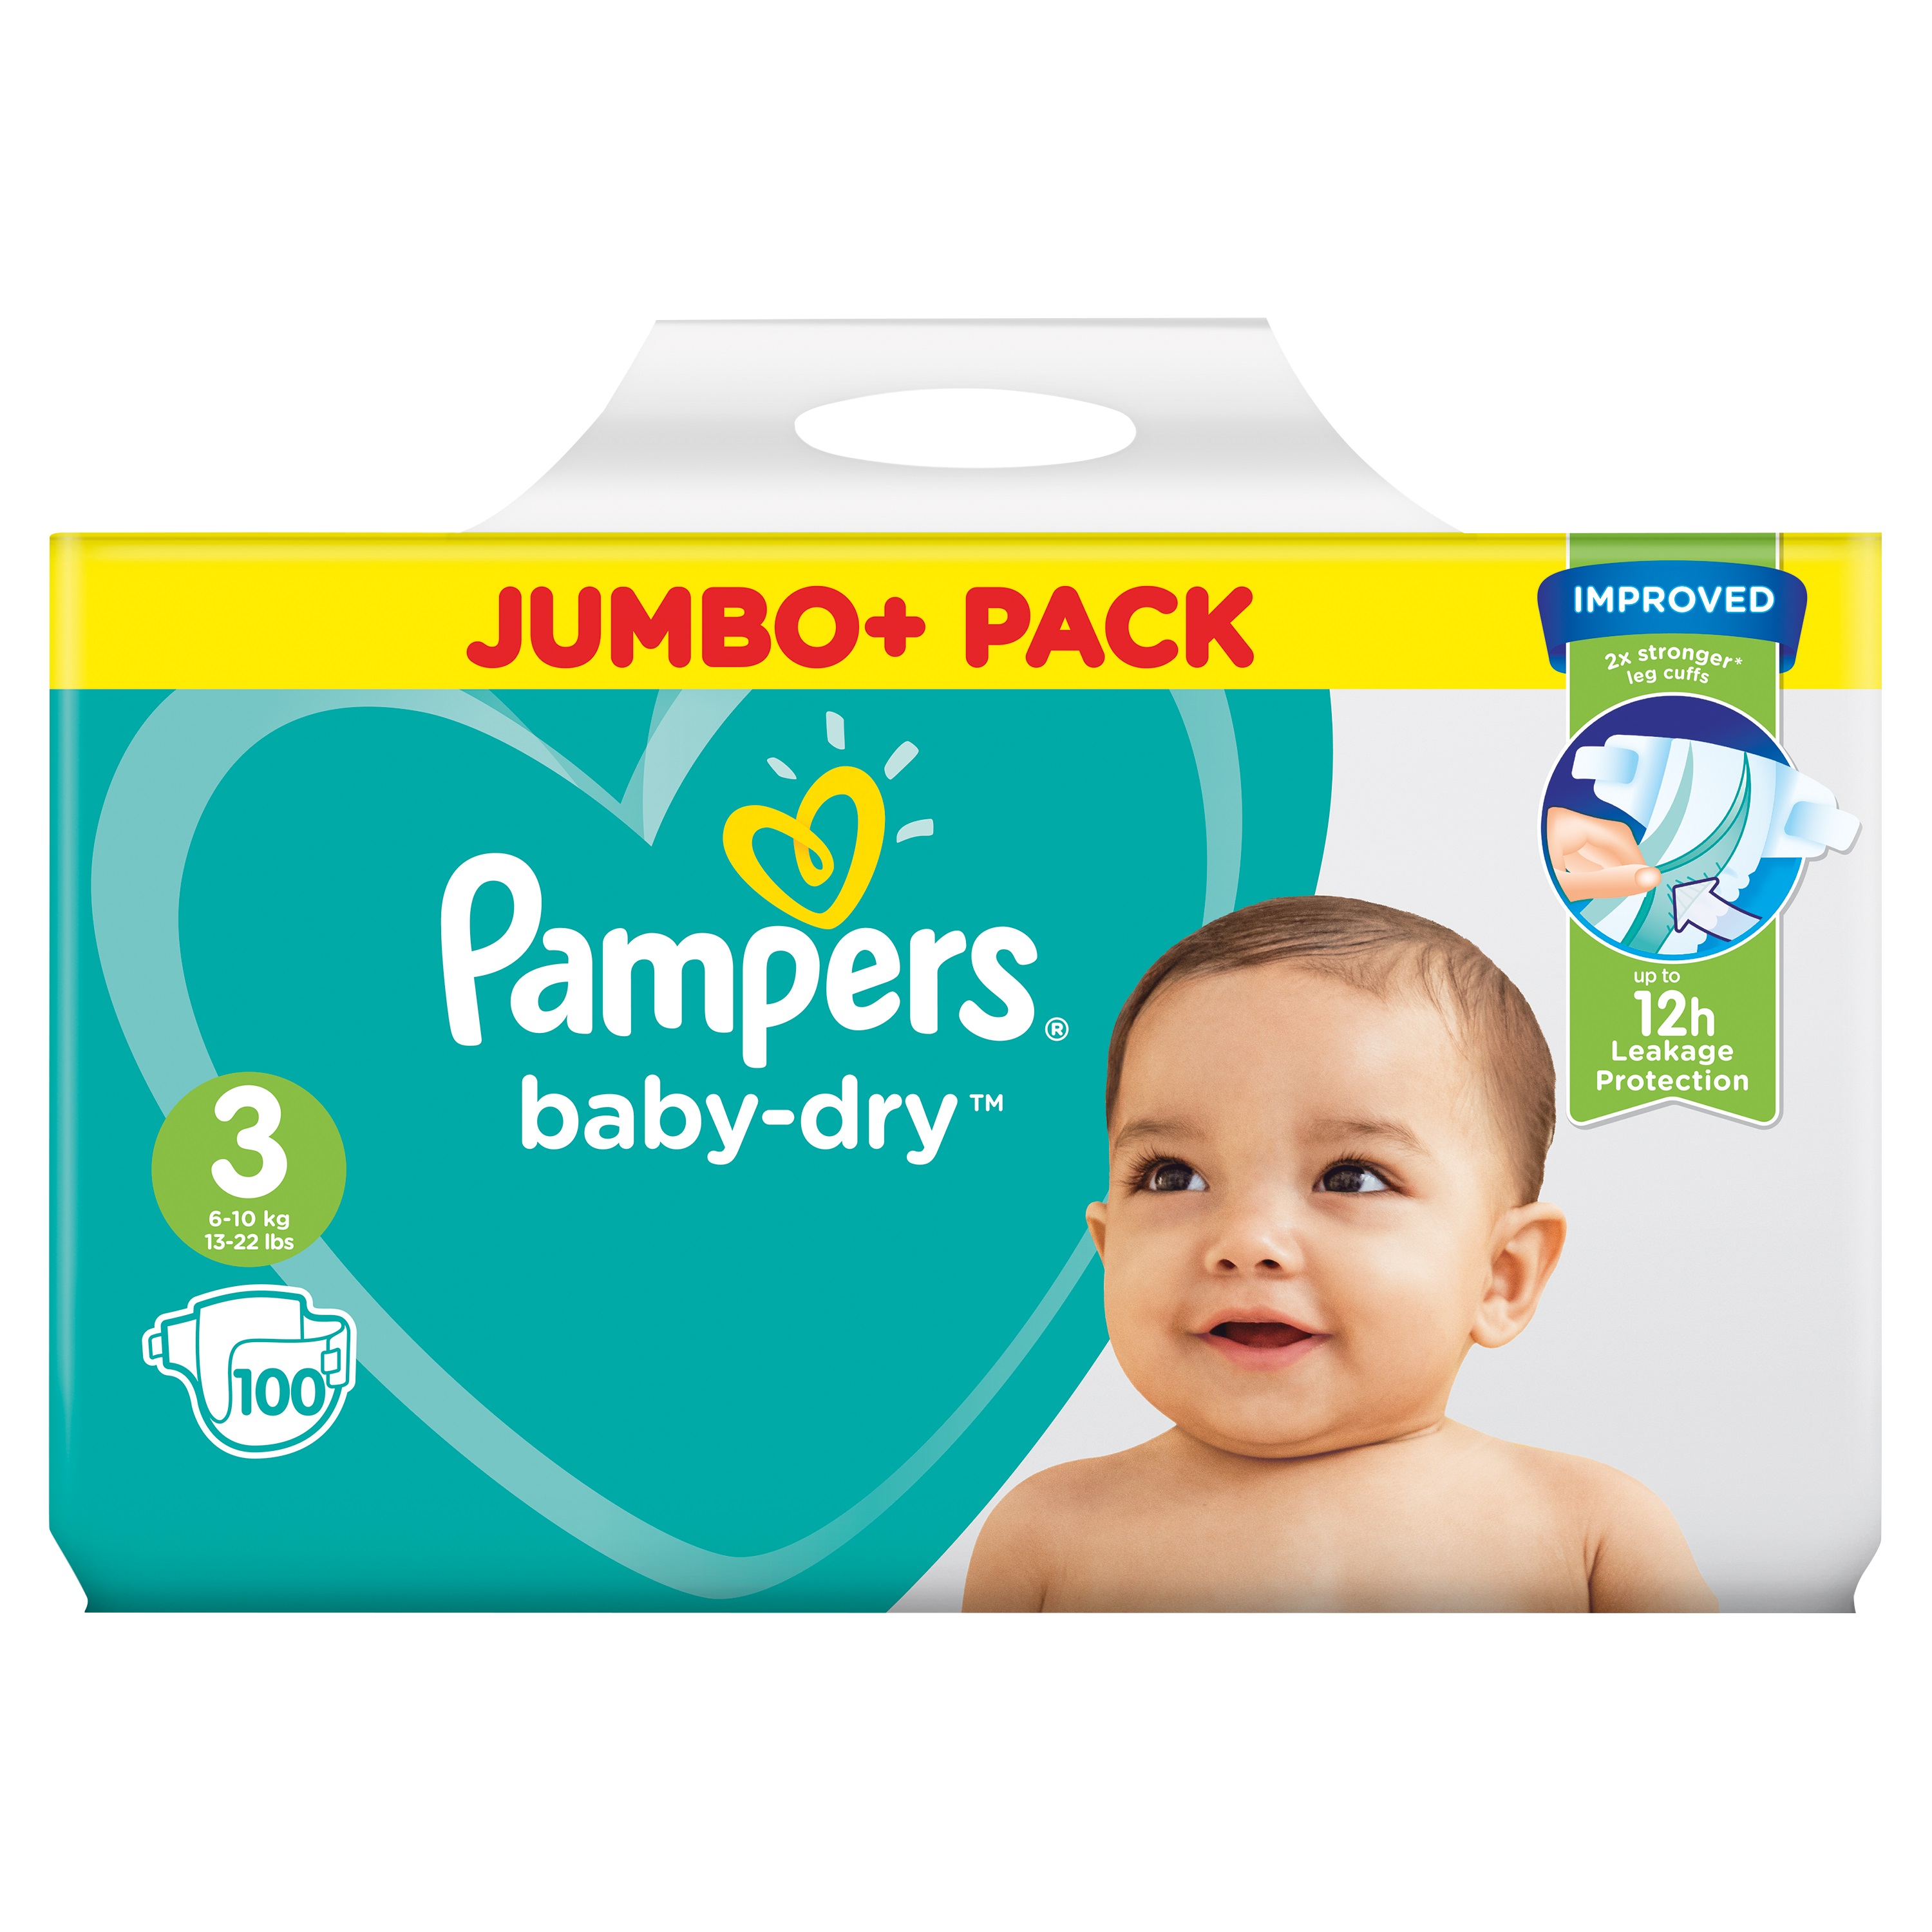 GP00050555 - Pampers Baby Dry Size 3 Jumbo - Pack of 100